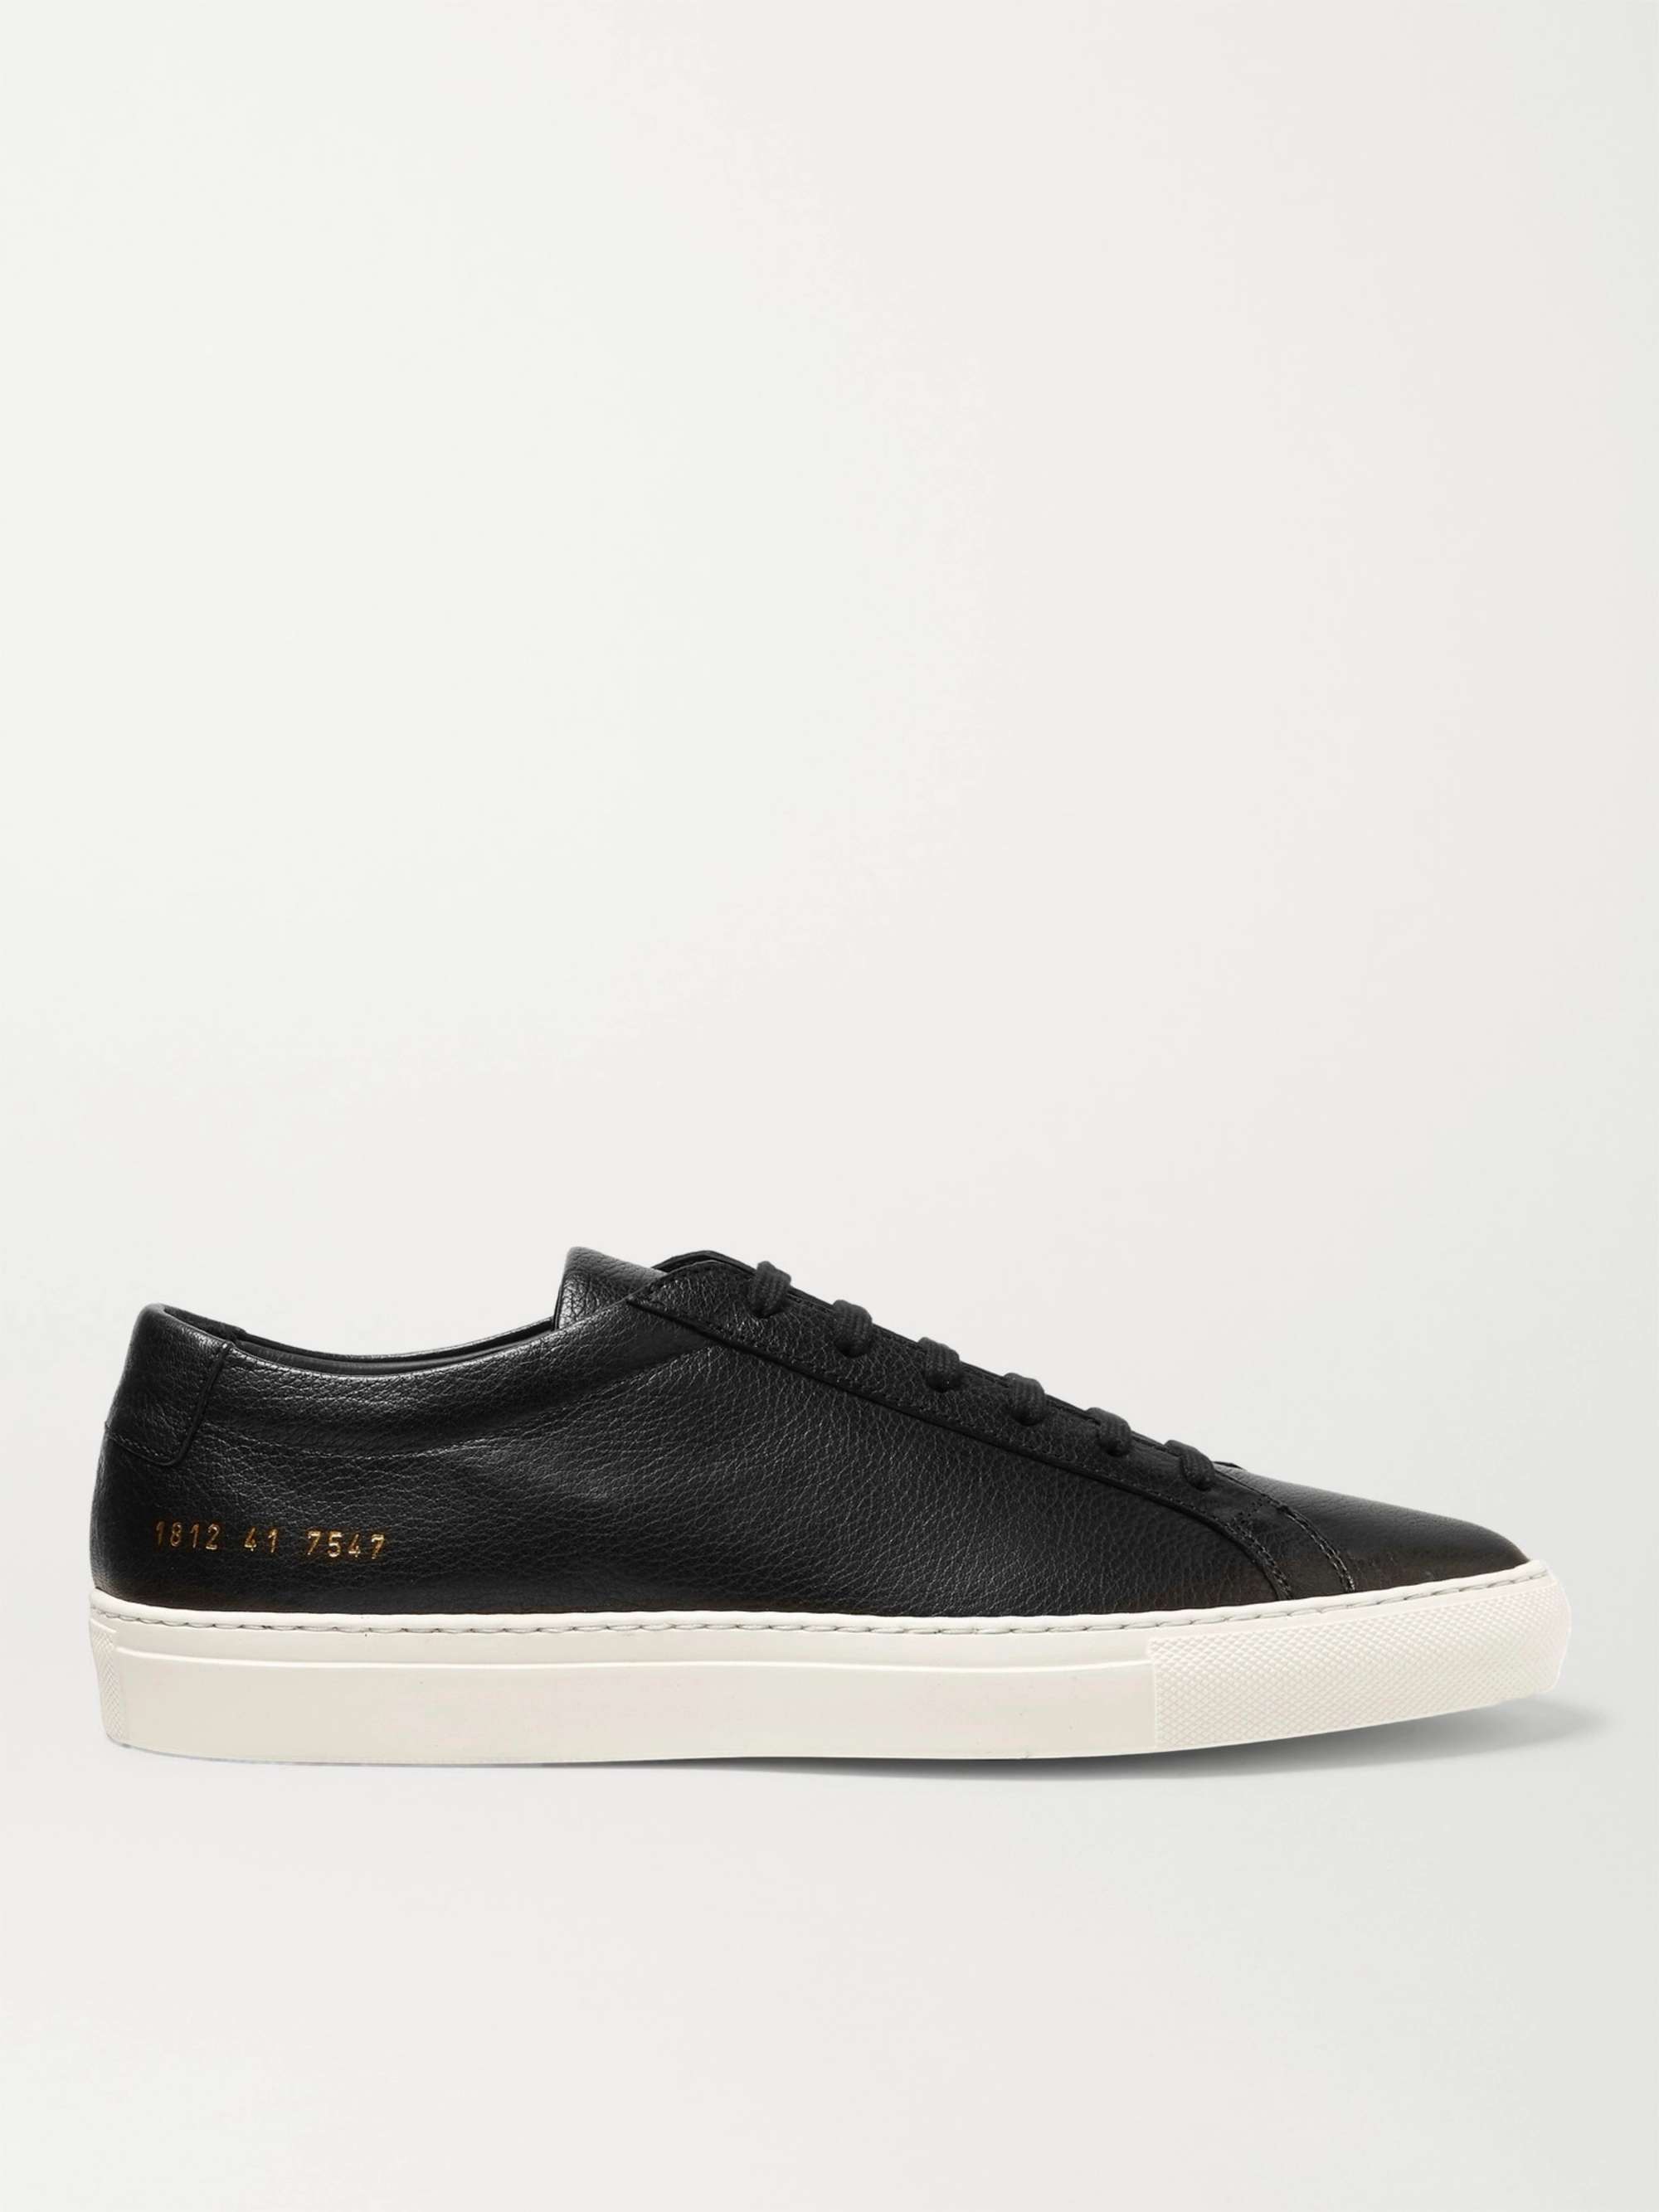 COMMON PROJECTS Original Achilles Full-Grain Leather Sneakers